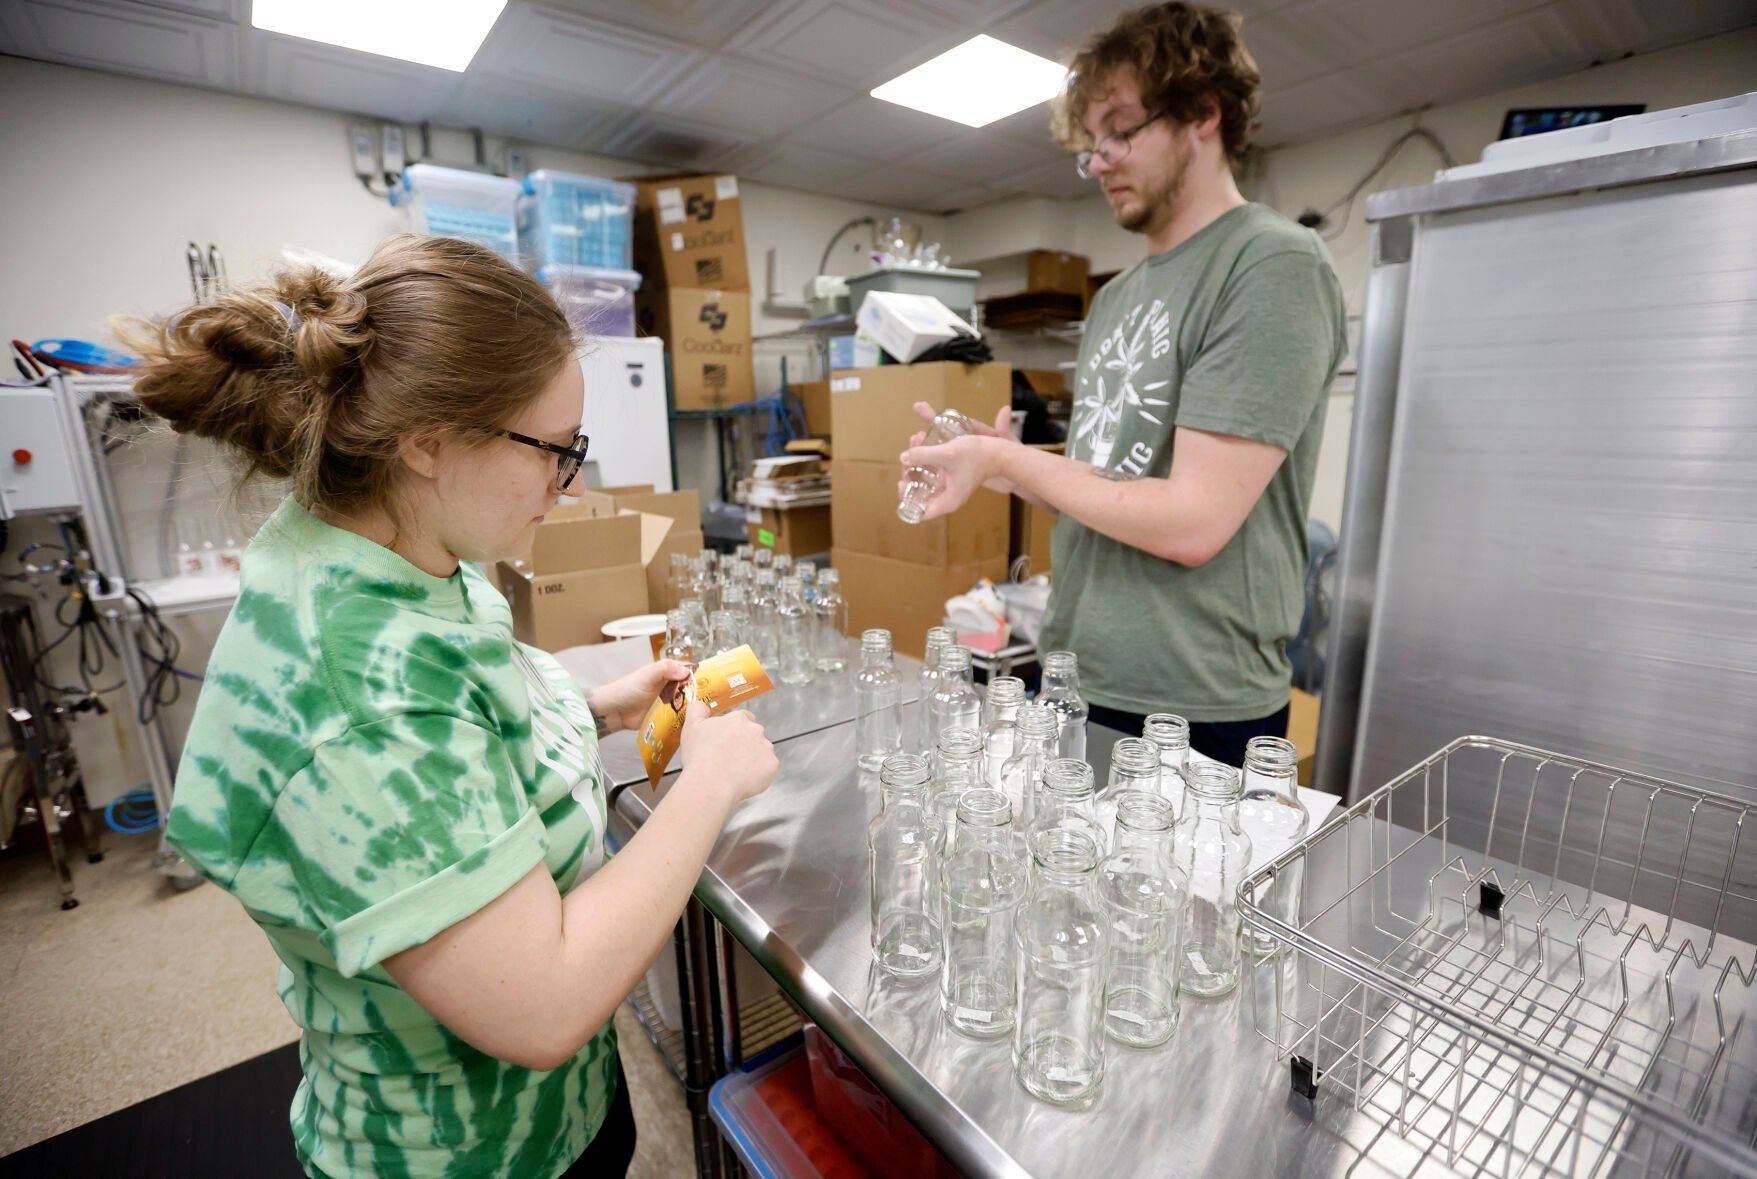 Tabitha Benson (left) and Matt Hopkins label bottles for products.    PHOTO CREDIT: JESSICA REILLY
Telegraph Herald